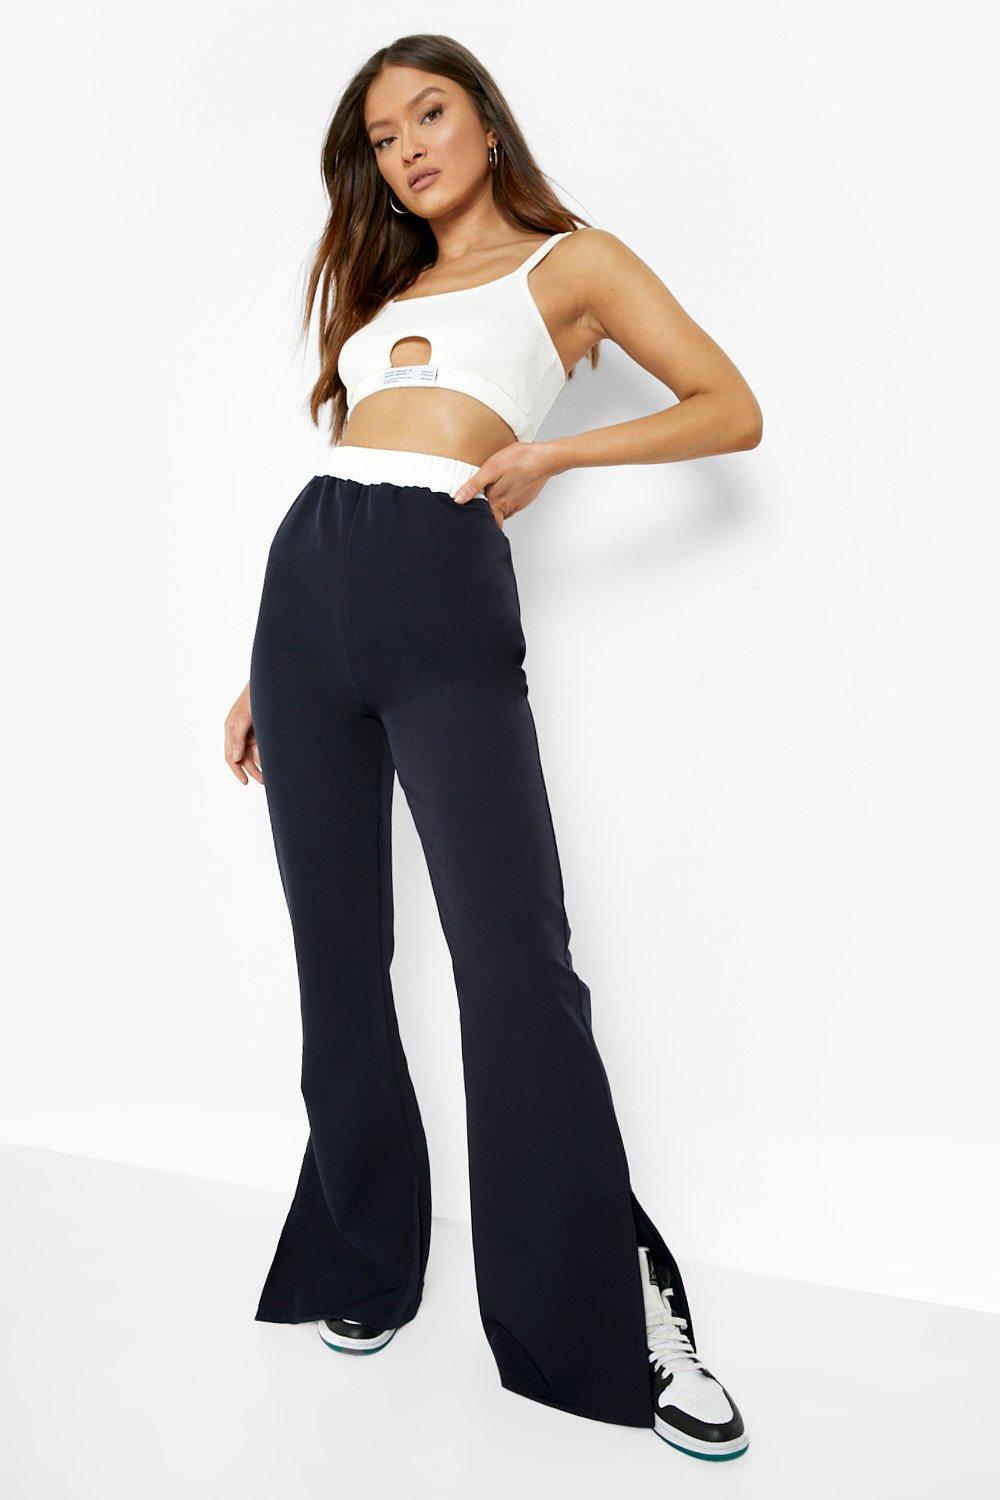 Boohoo Tall Contrast Waistband Detail Pants in Black